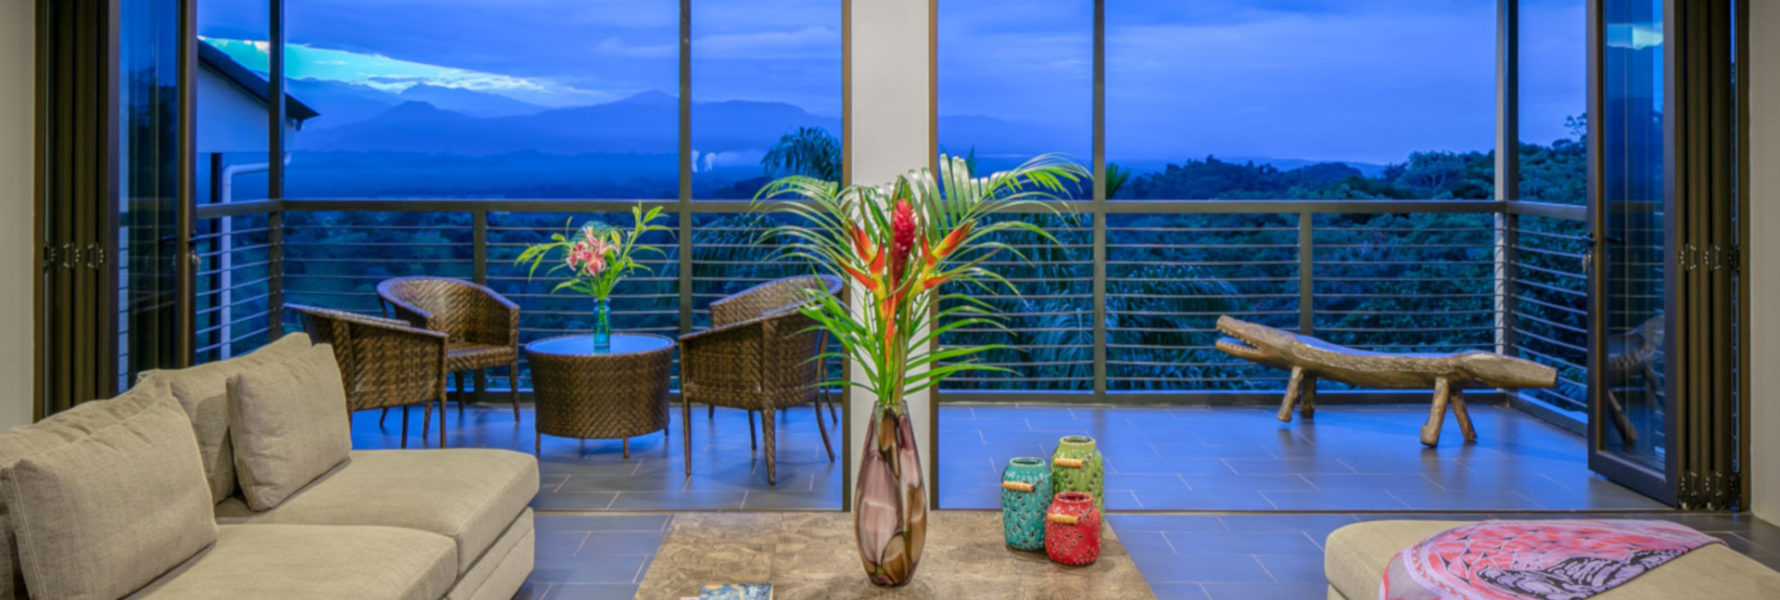 View the high mountain peaks at dusk right from the main living area in the Casa Querencia.